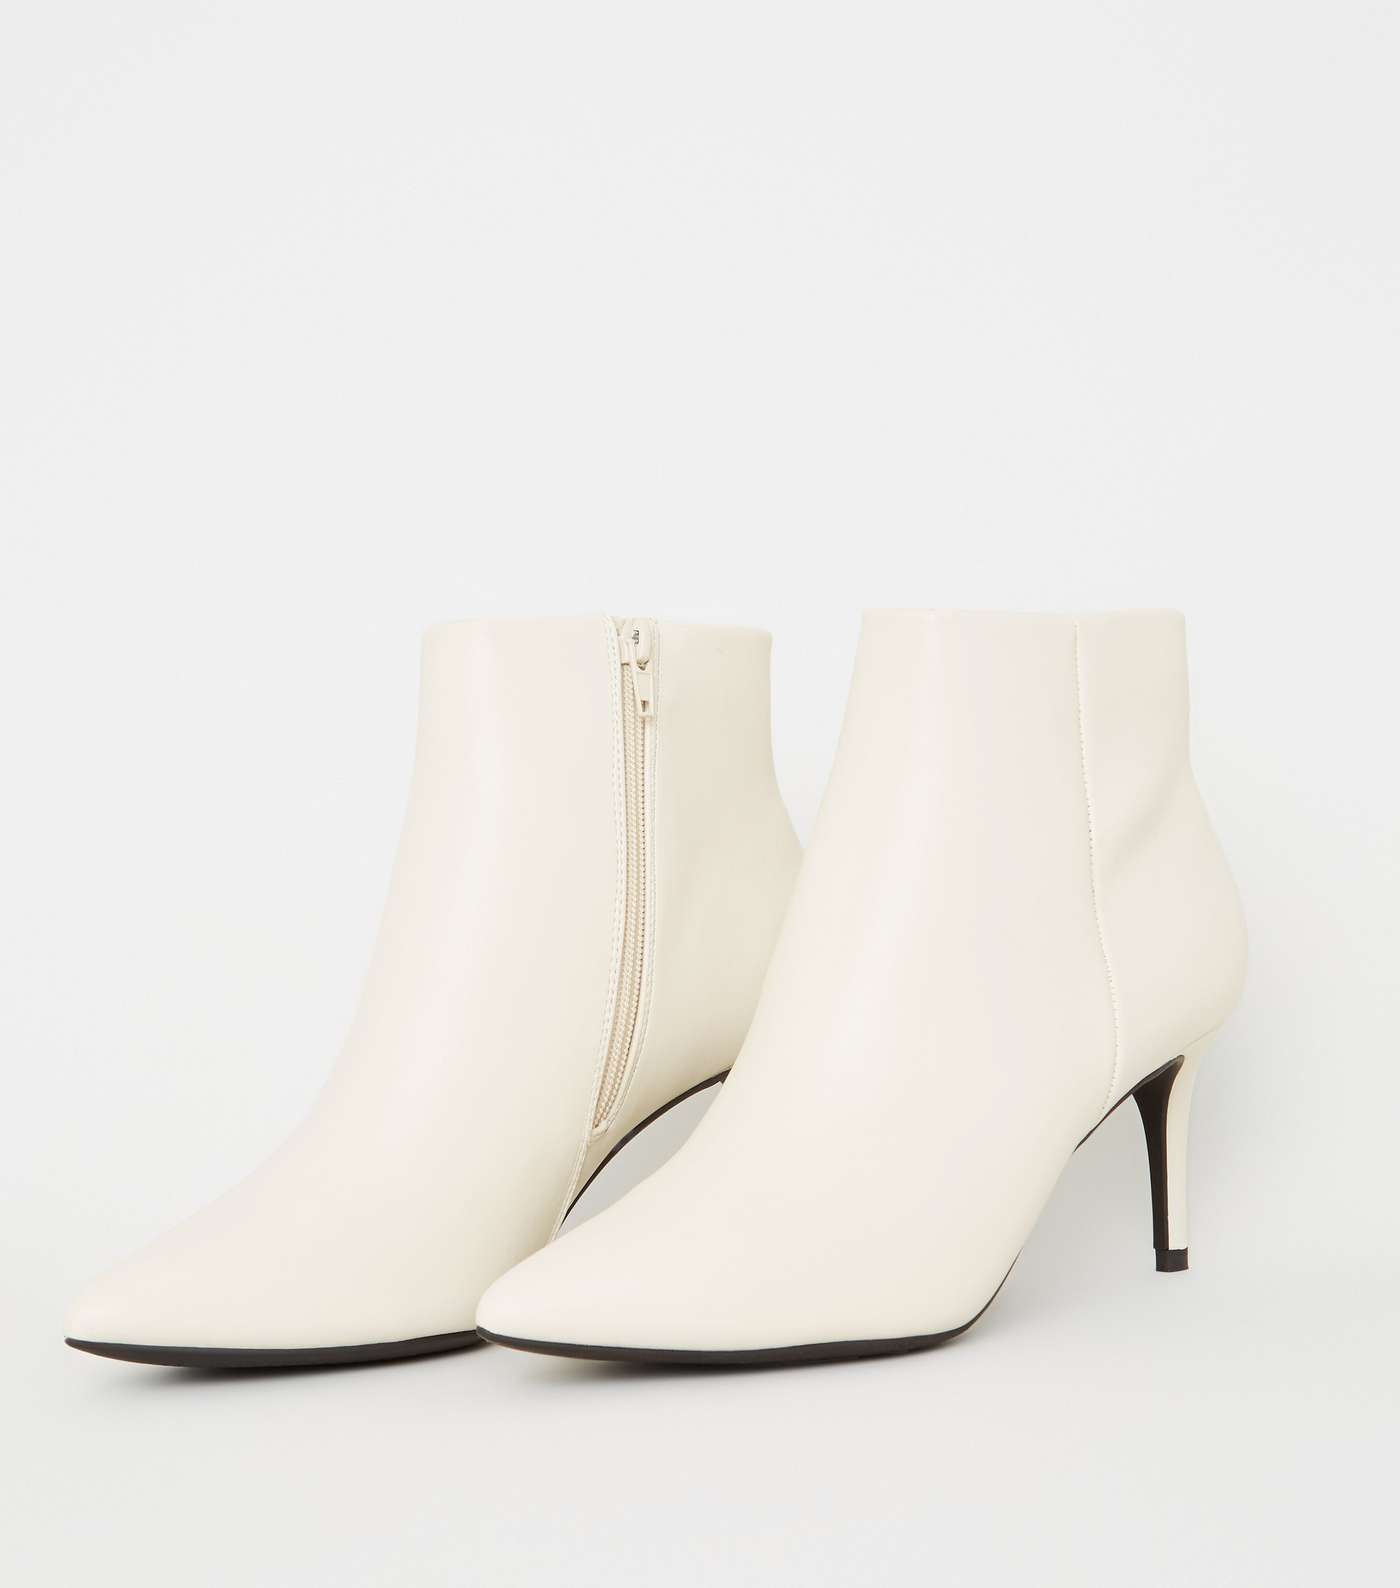 Off White Leather-Look Pointed Stiletto Boots Image 3